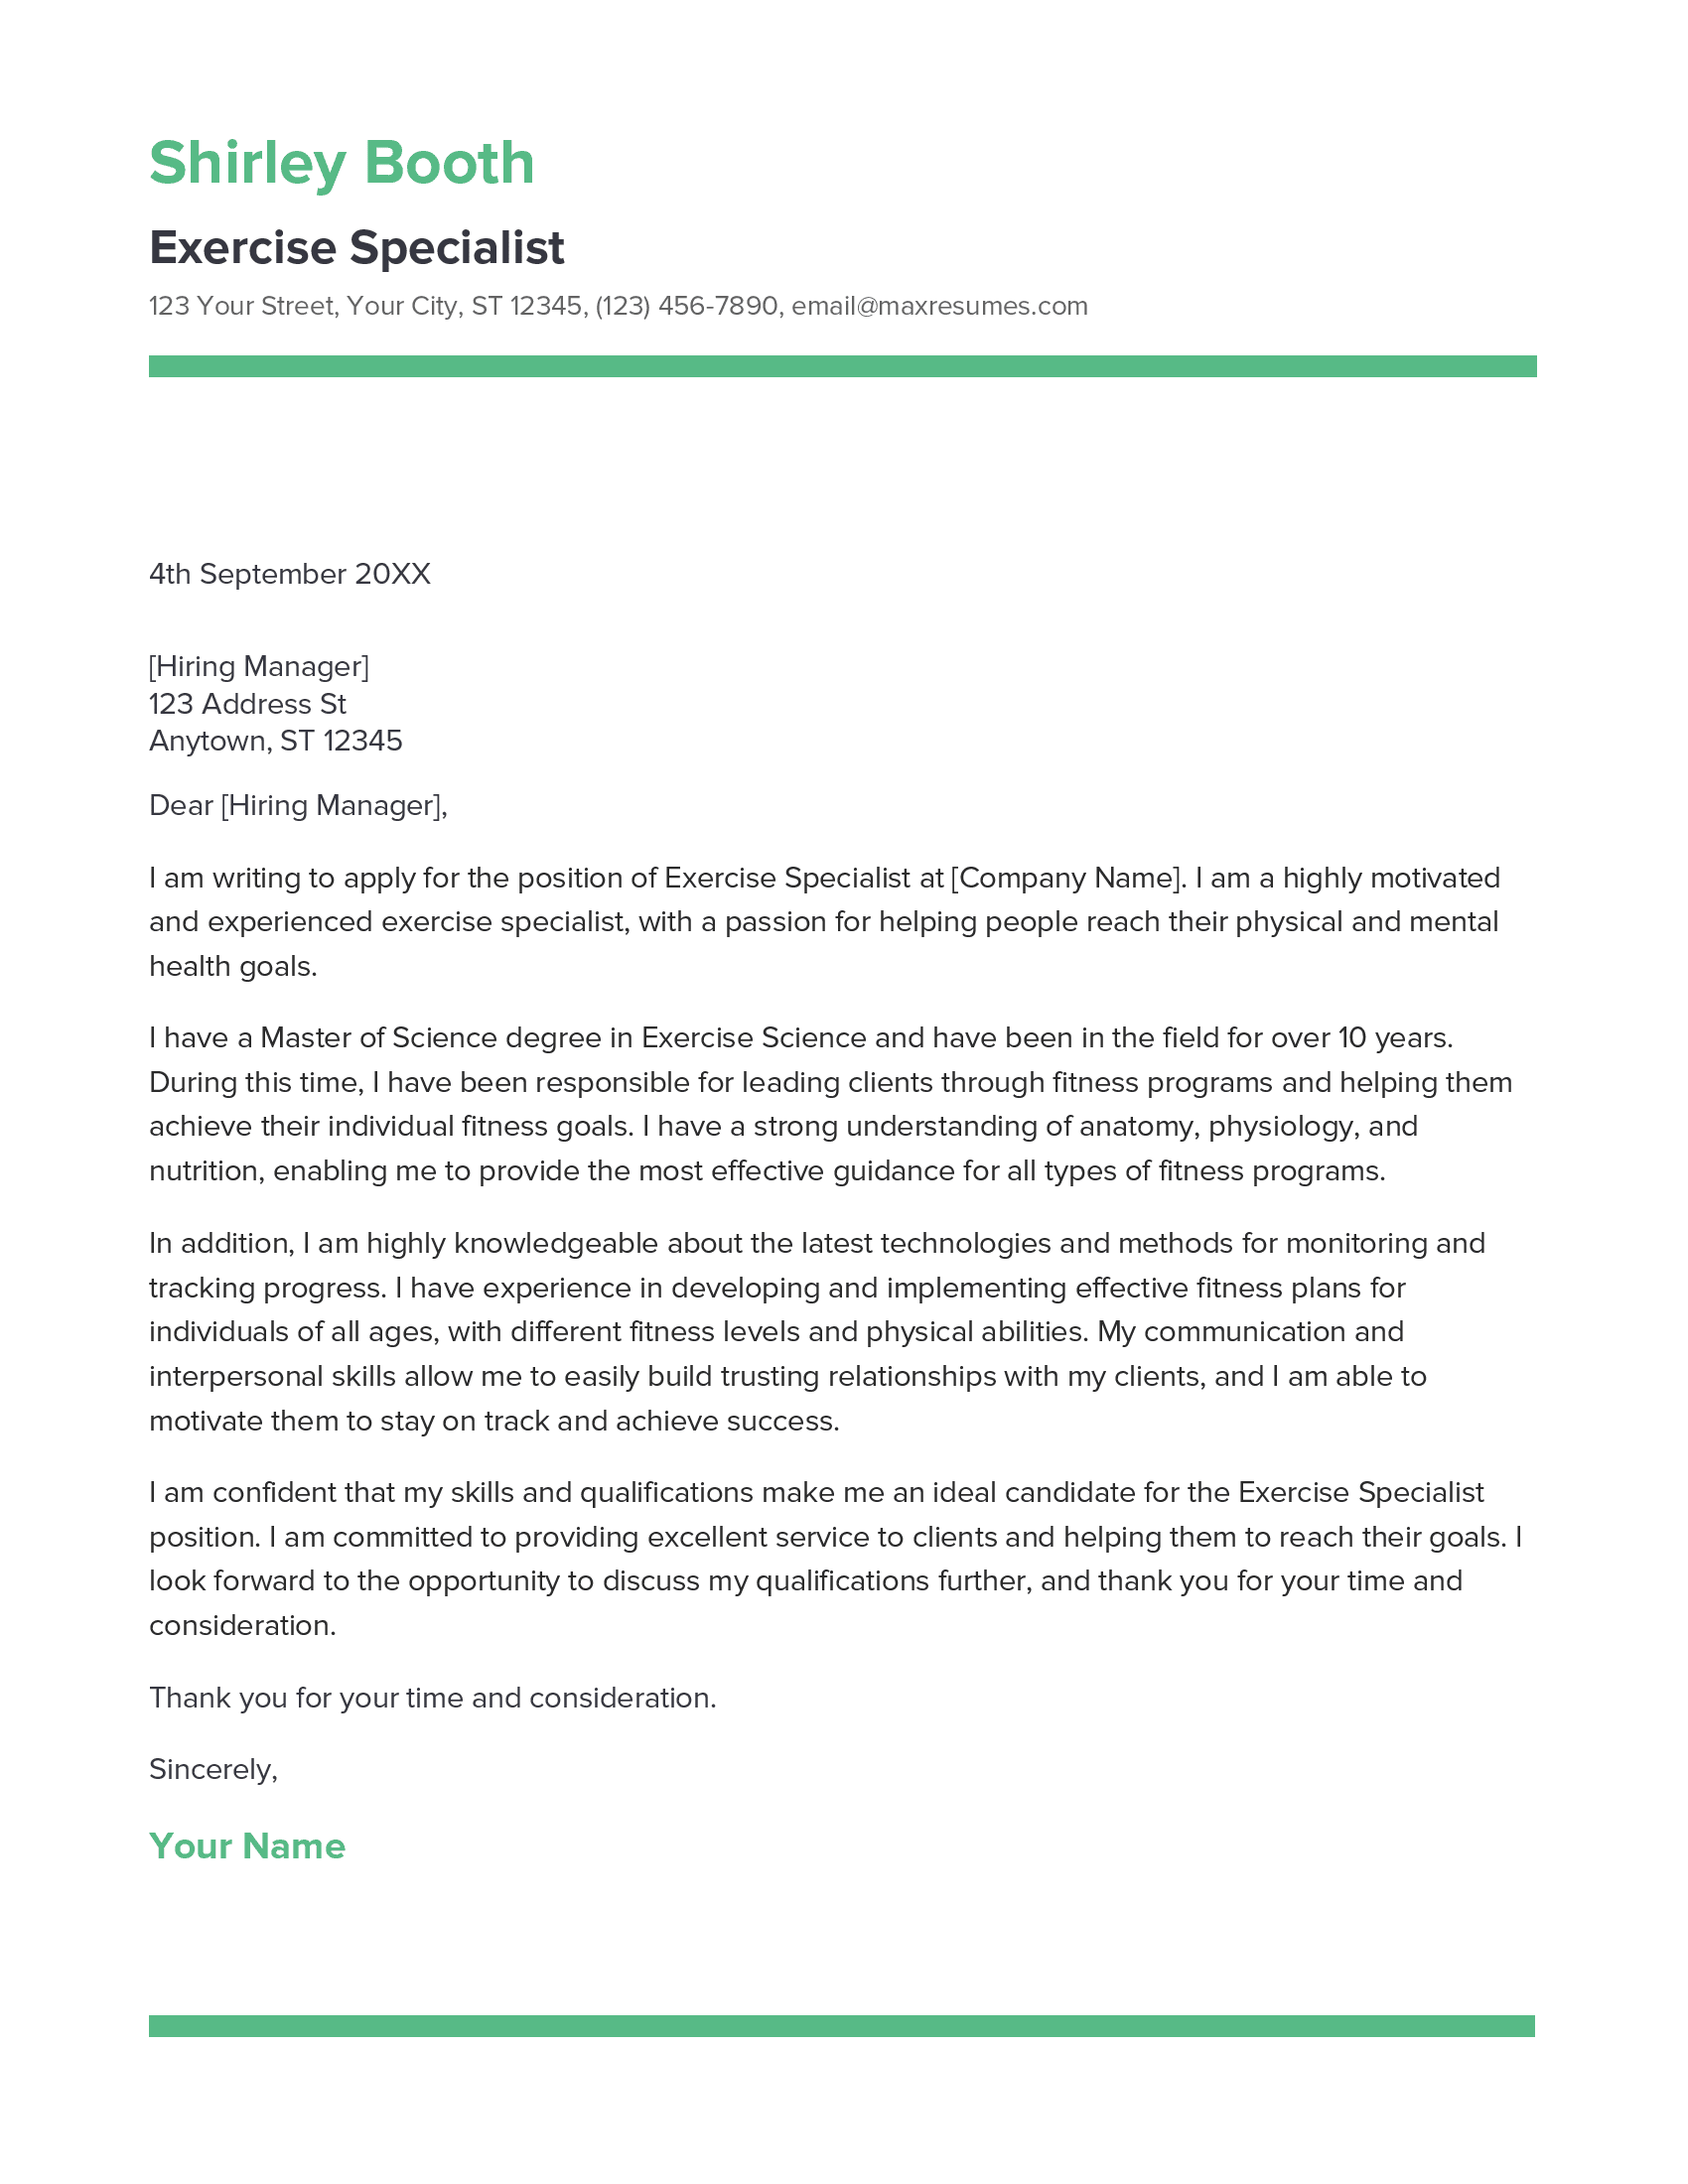 Exercise Specialist Cover Letter Example